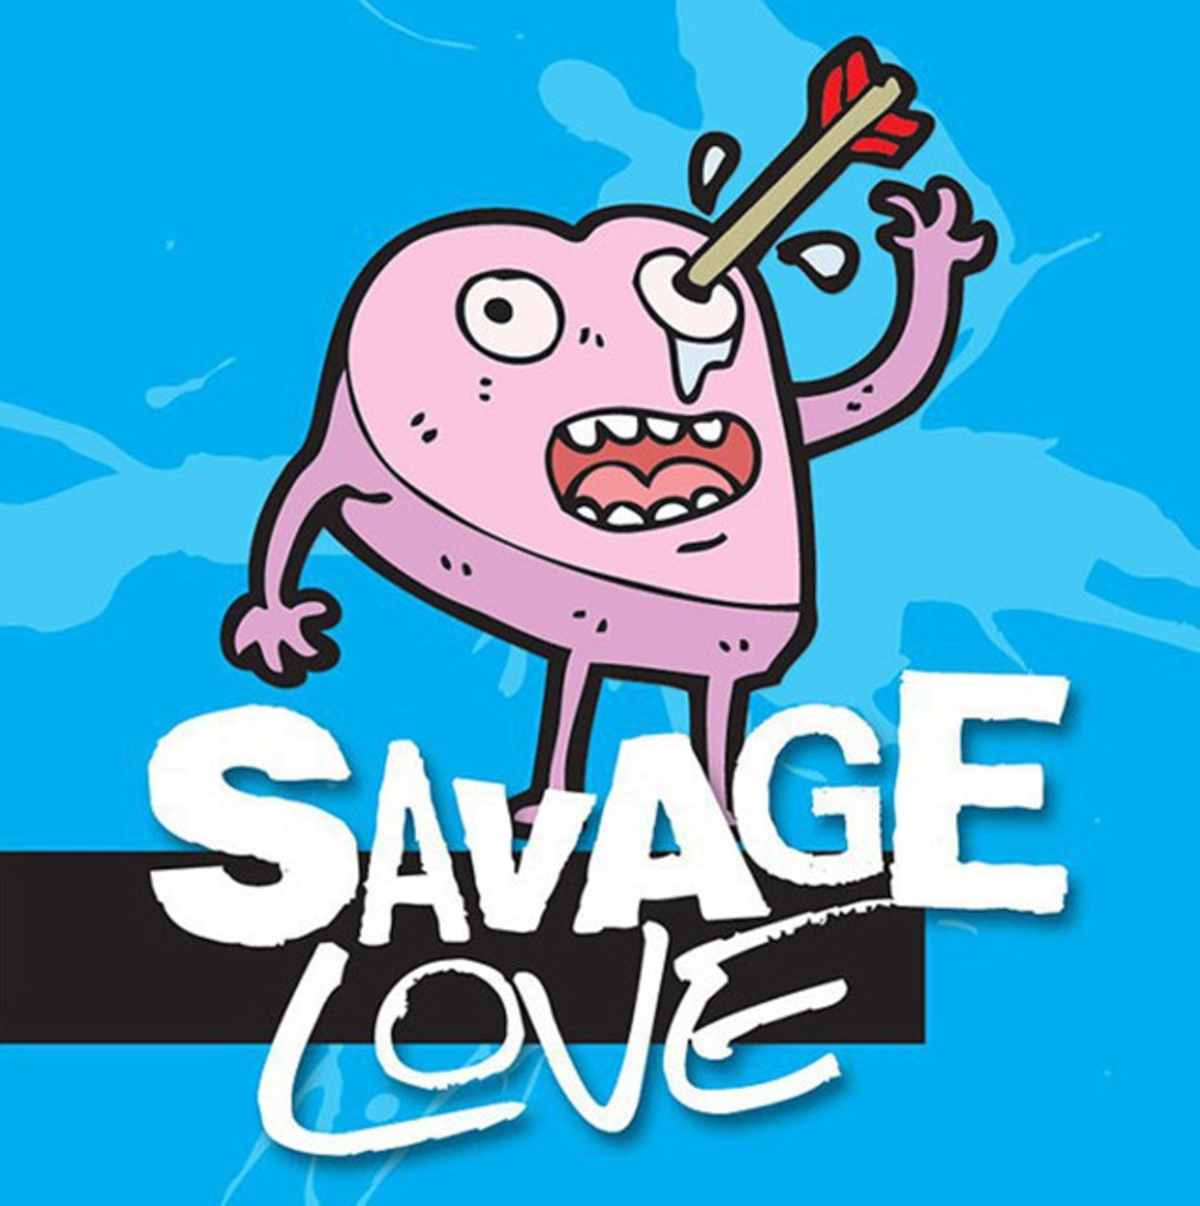 Savage Love My bi-sexual wife and I have an open relationship, but now Im the straight guy feeling left out Columns Tampa Creative Loafing Tampa